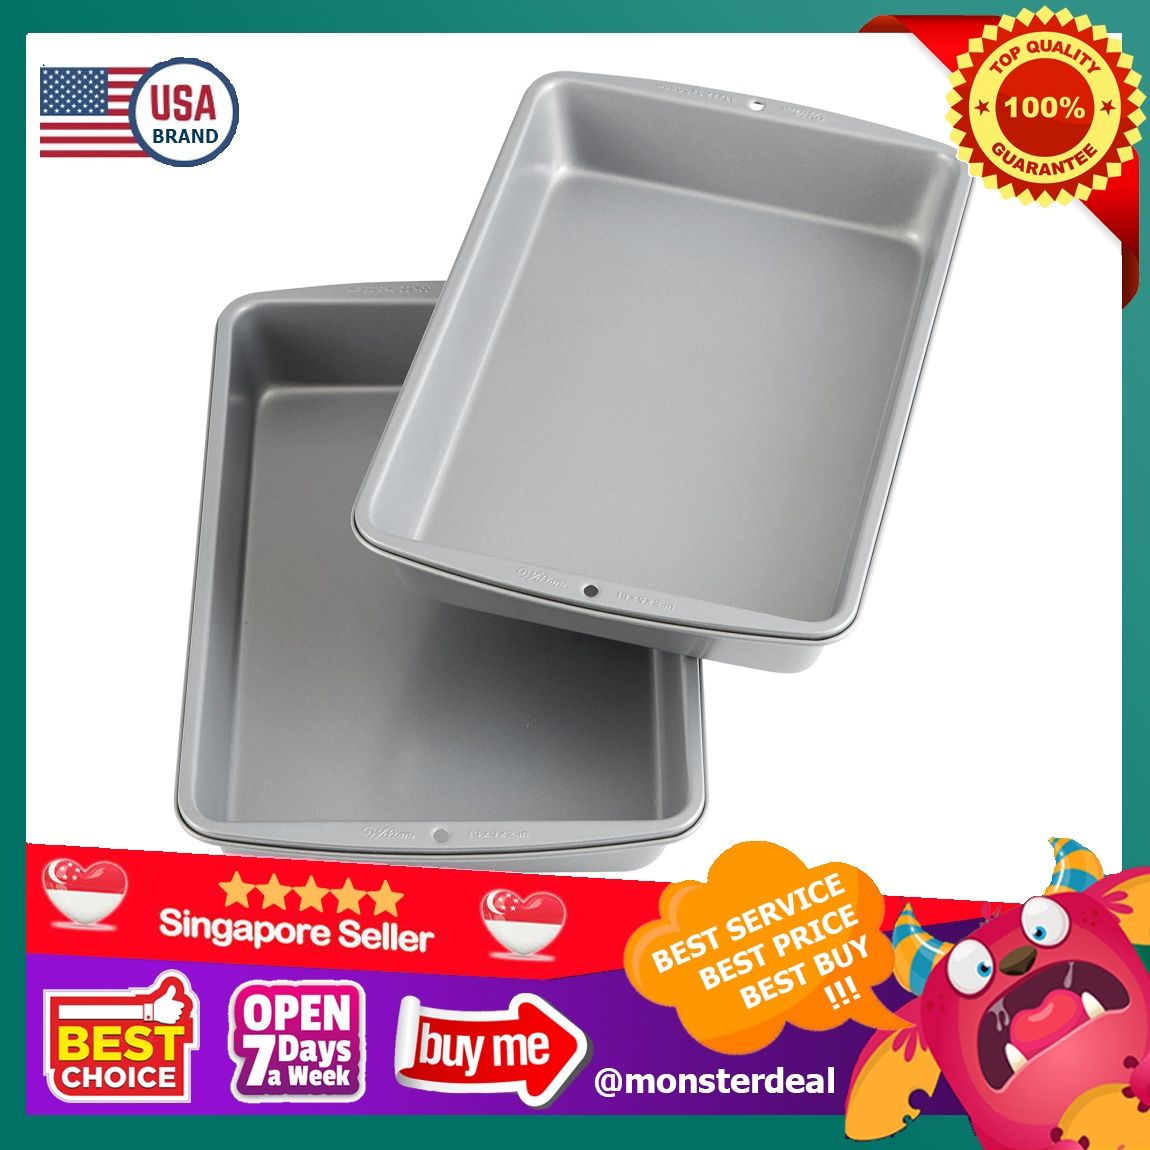 Wilton Recipe Right Oblong Cake Pan with Cover, 9 x 13